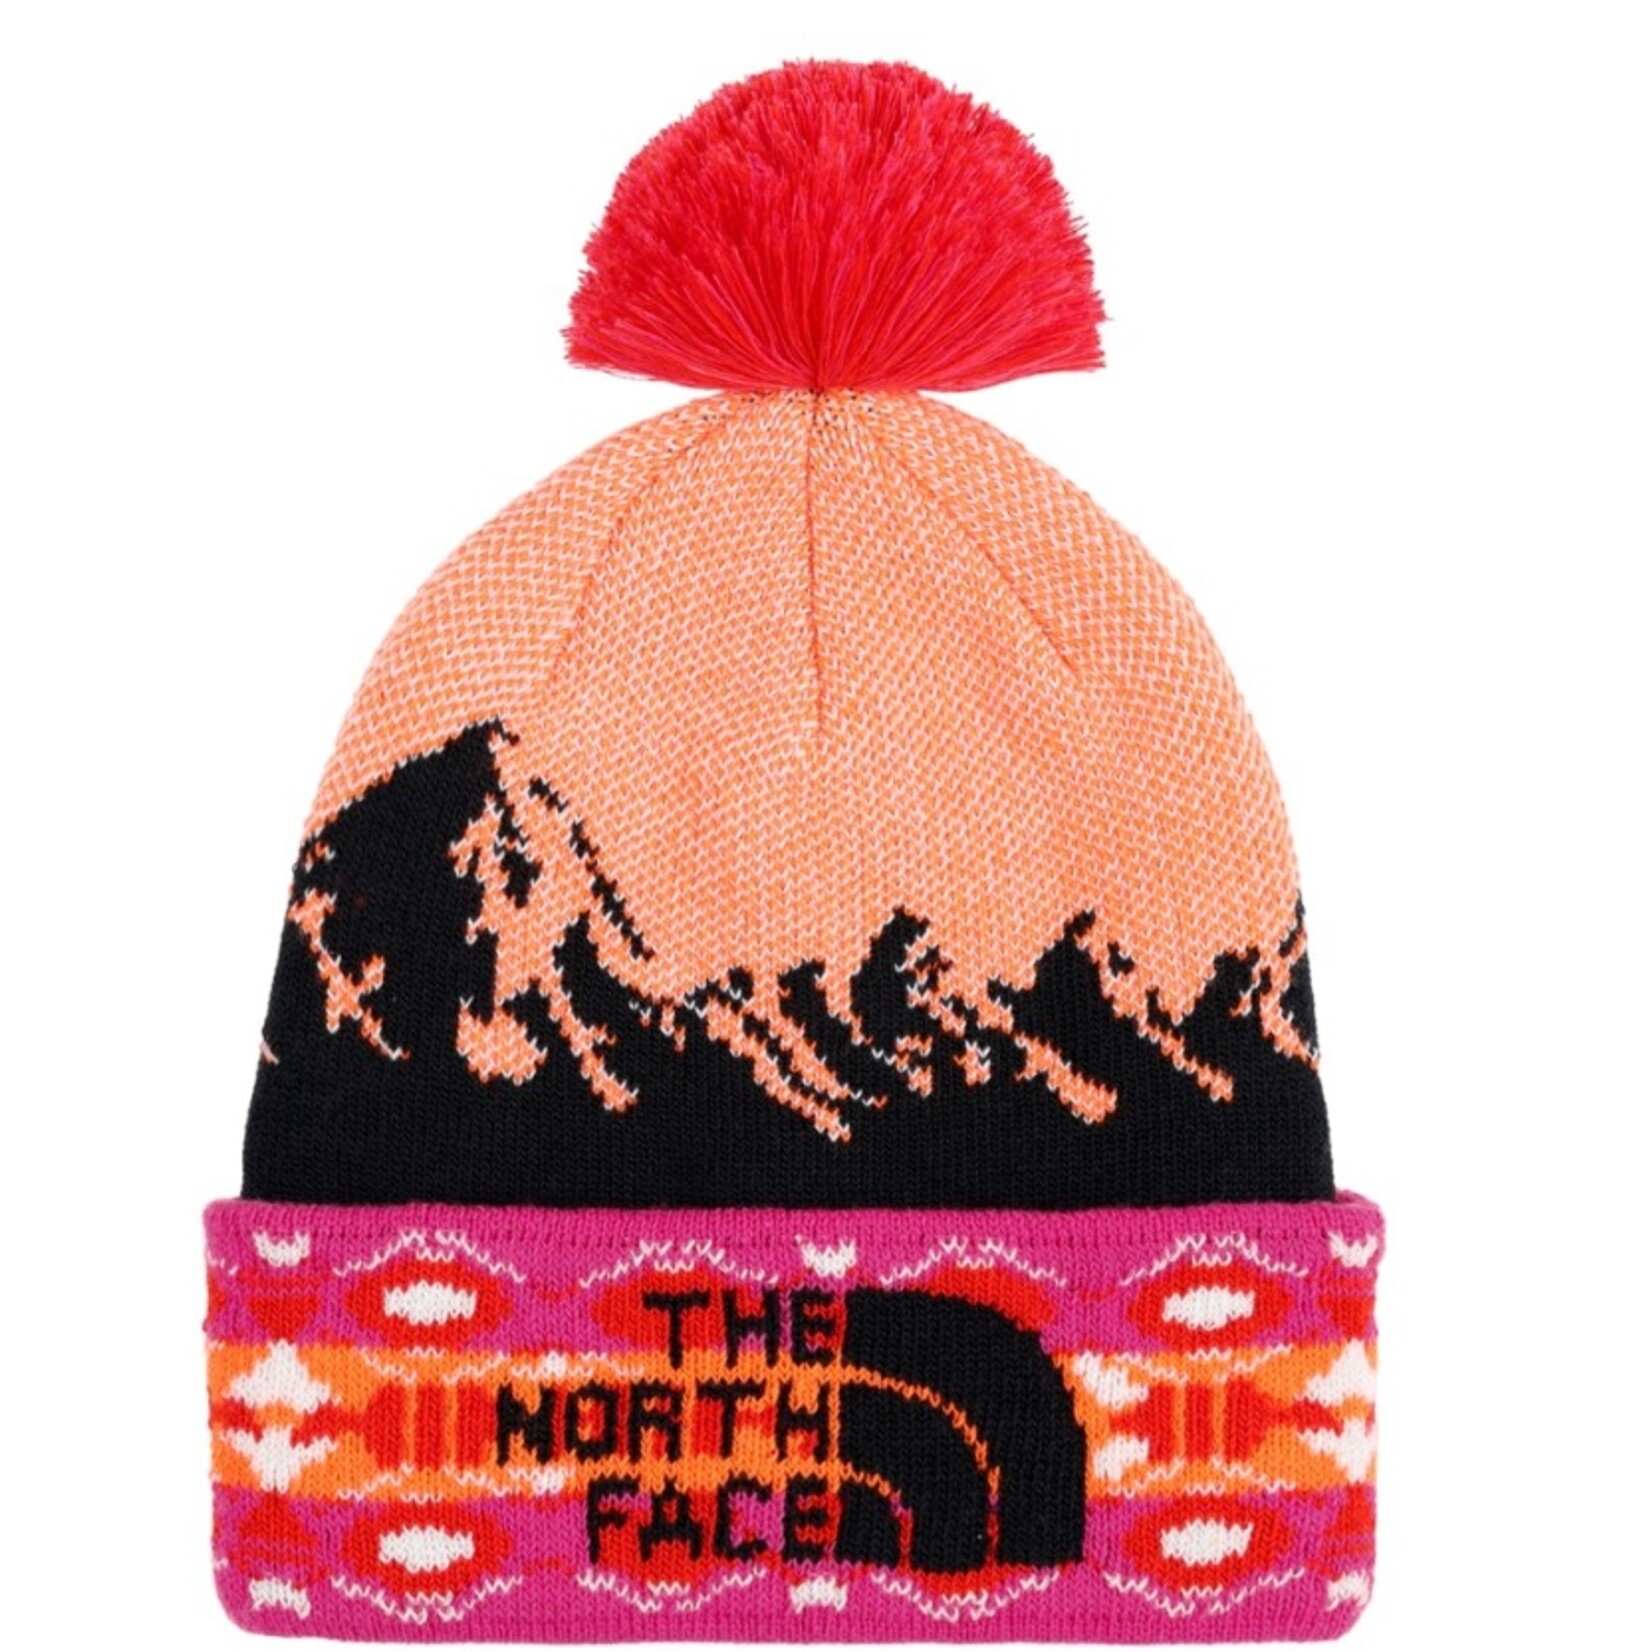 THE NORTH FACE Recycled Pom Pom